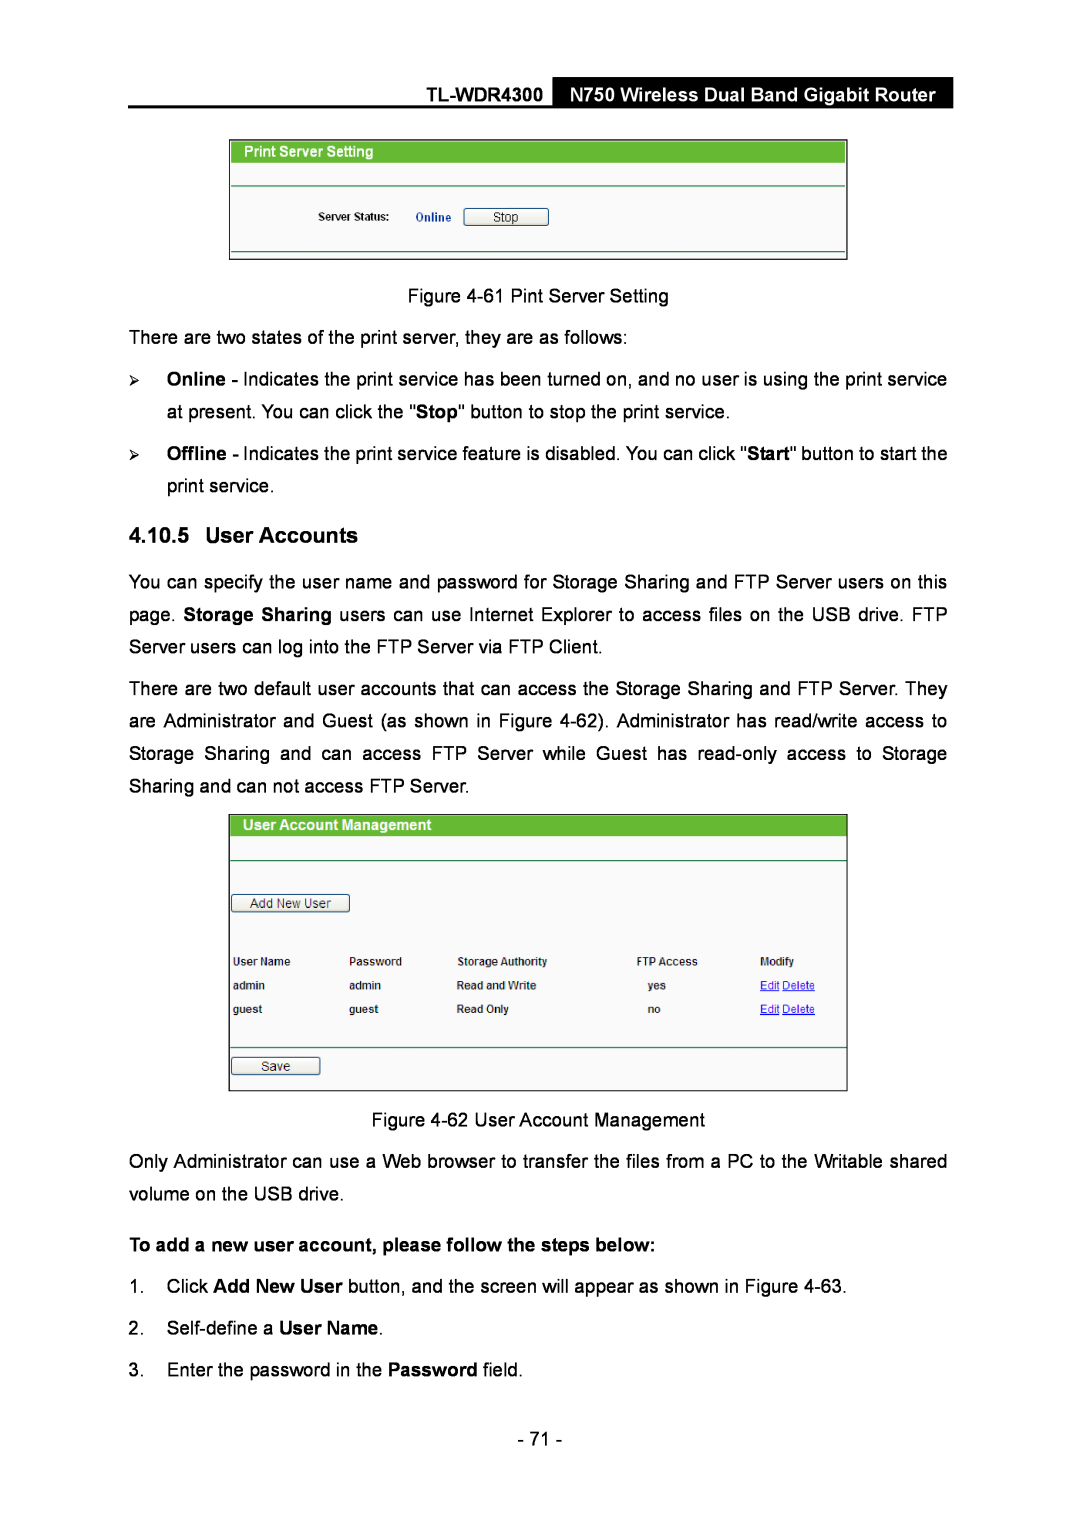 TP-Link TL-WDR4300 manual User Accounts, To add a new user account, please follow the steps below 